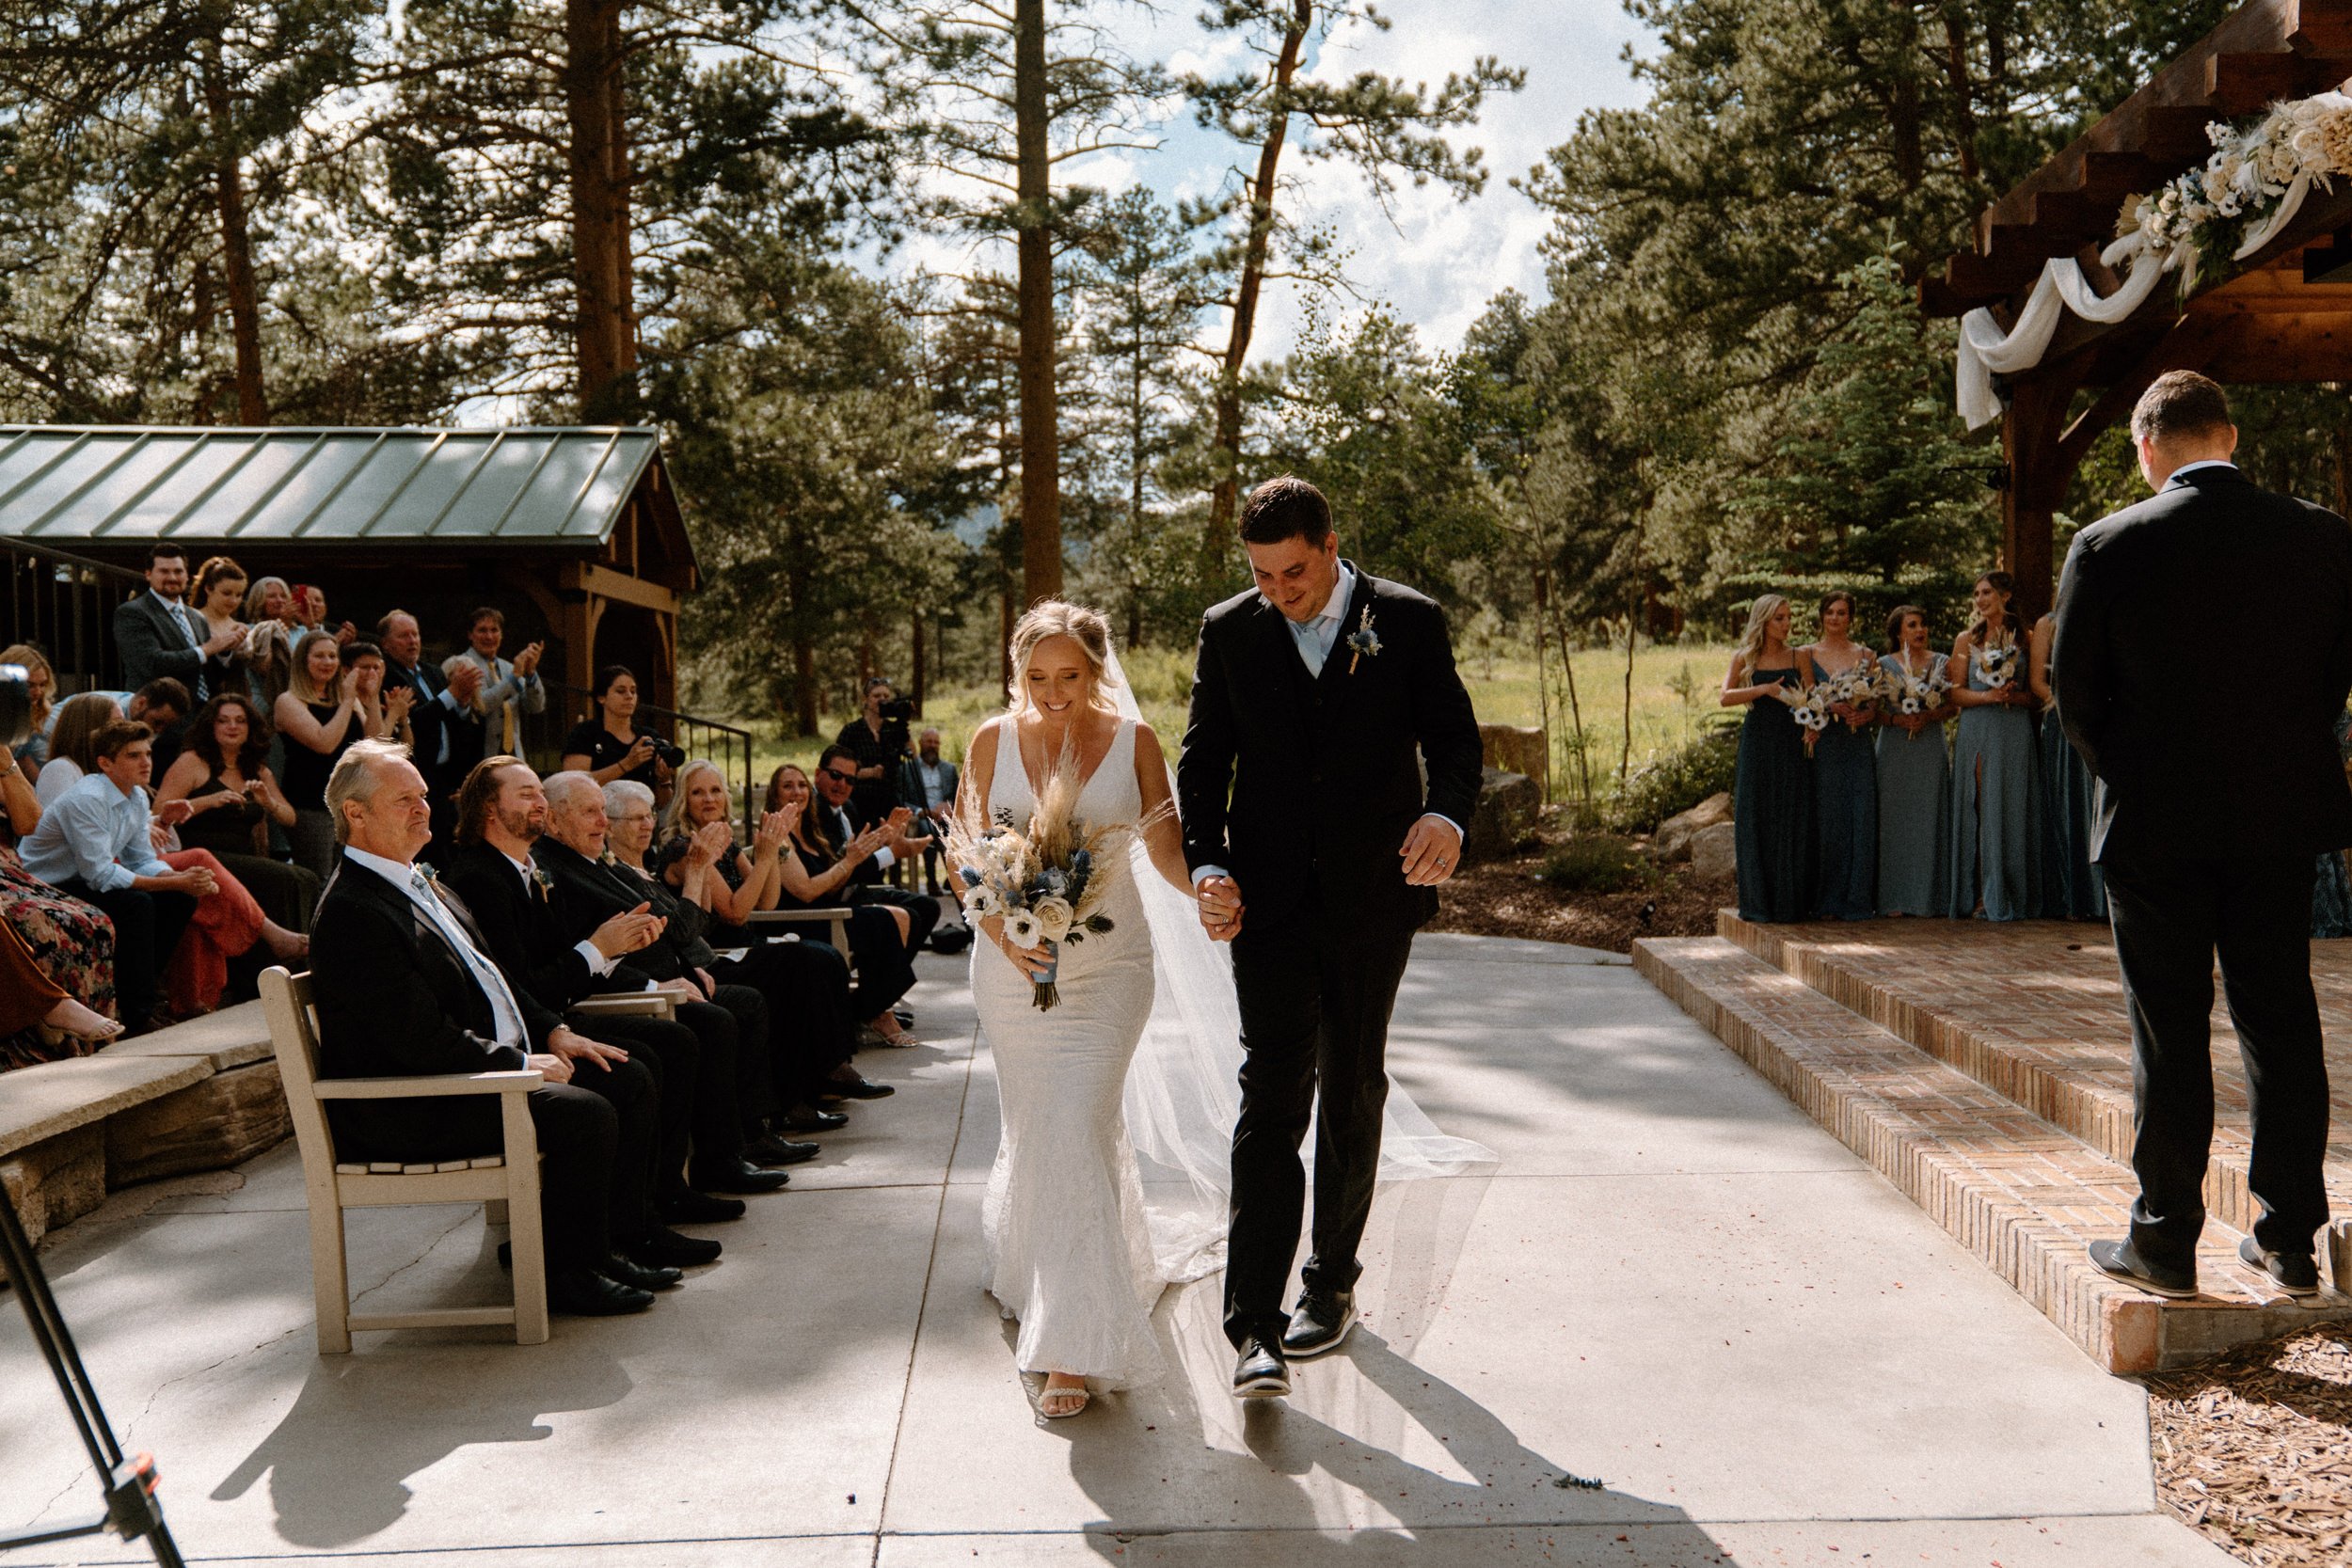 The bride and groom walk down the aisle together at the Della Terra Mountain Chateau in Estes Park, CO